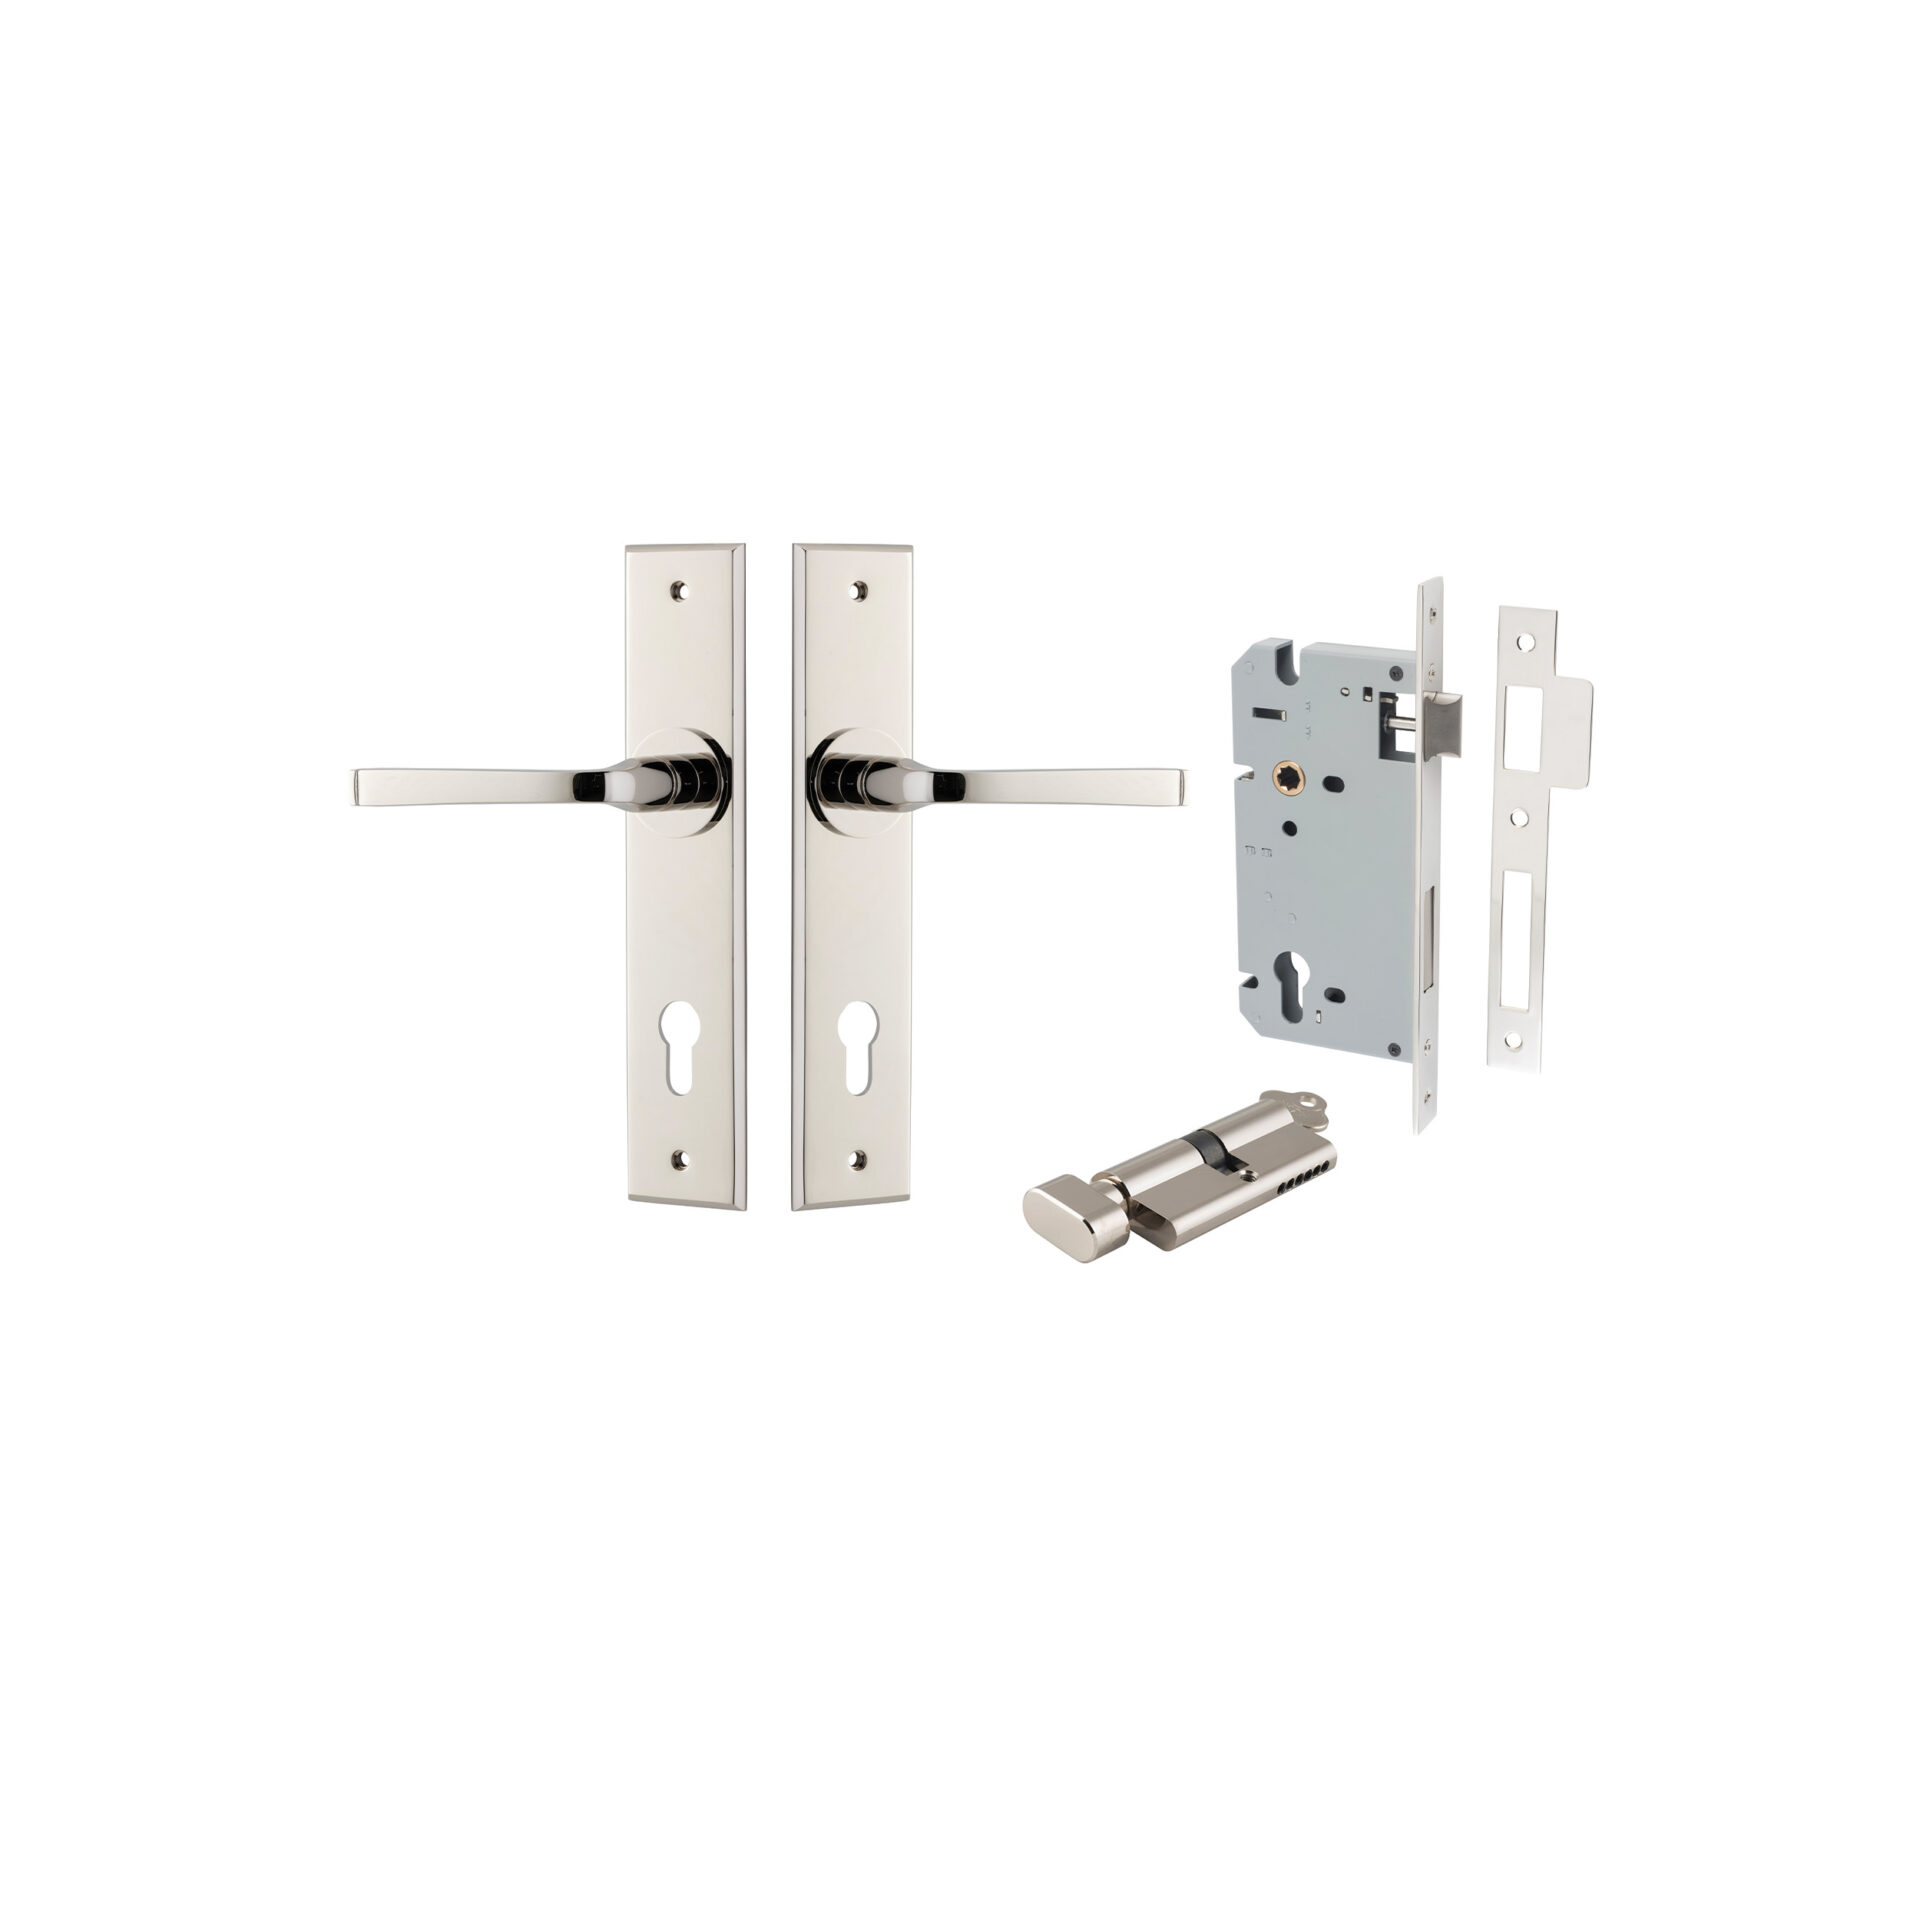 14288KENTR60KT - Annecy Lever - Chamfered Backplate Entrance Kit with High Security Lock - Polished Nickel - Entrance